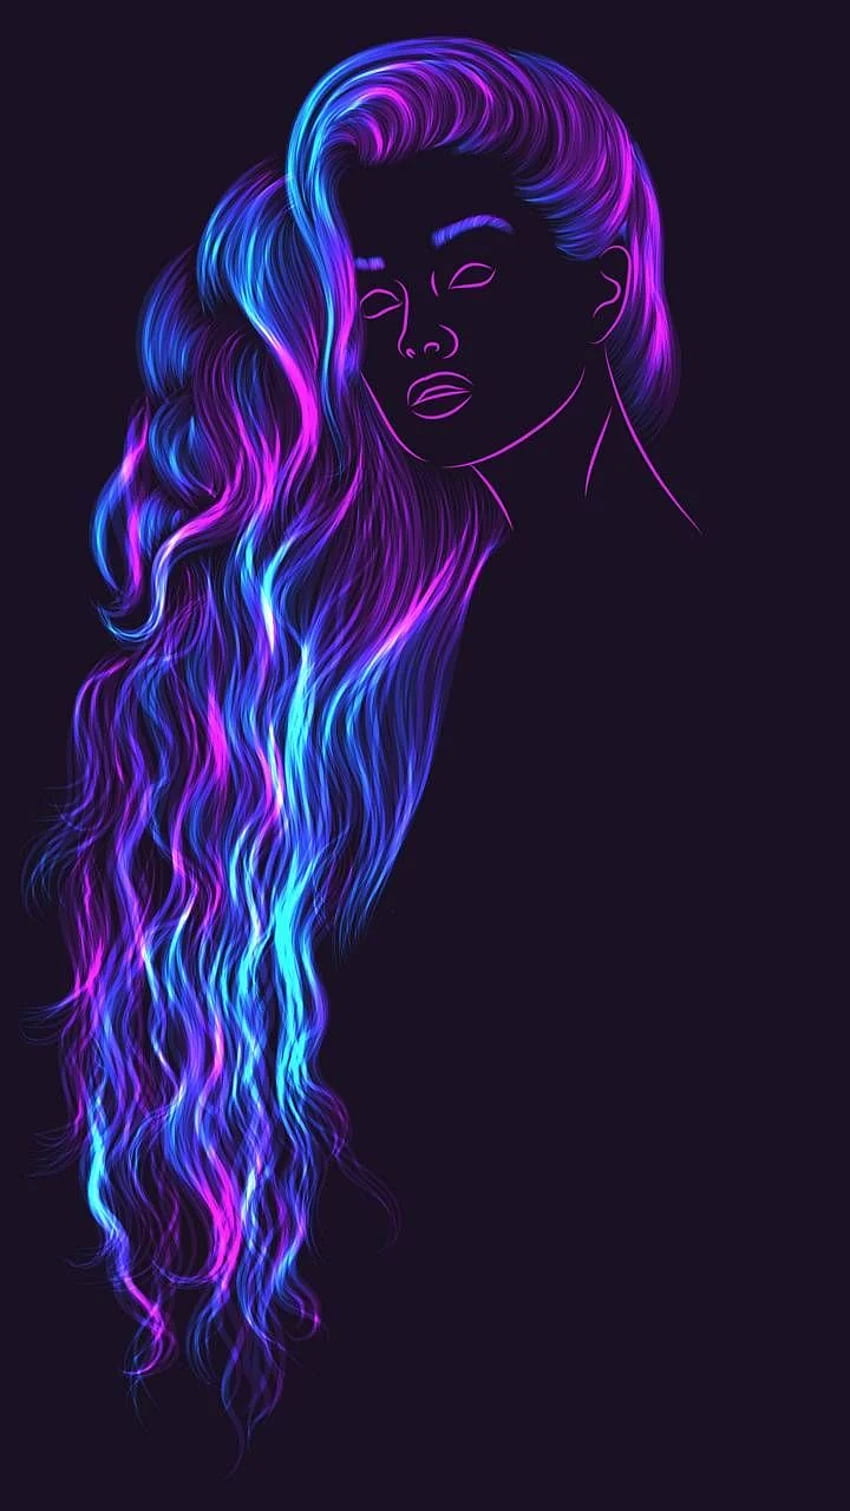 Neon girl by FernandoLizondro - 09 now. Browse millions of popular blue and. Neon girl, Neon , Surreal art, Cool Girl Neon HD phone wallpaper